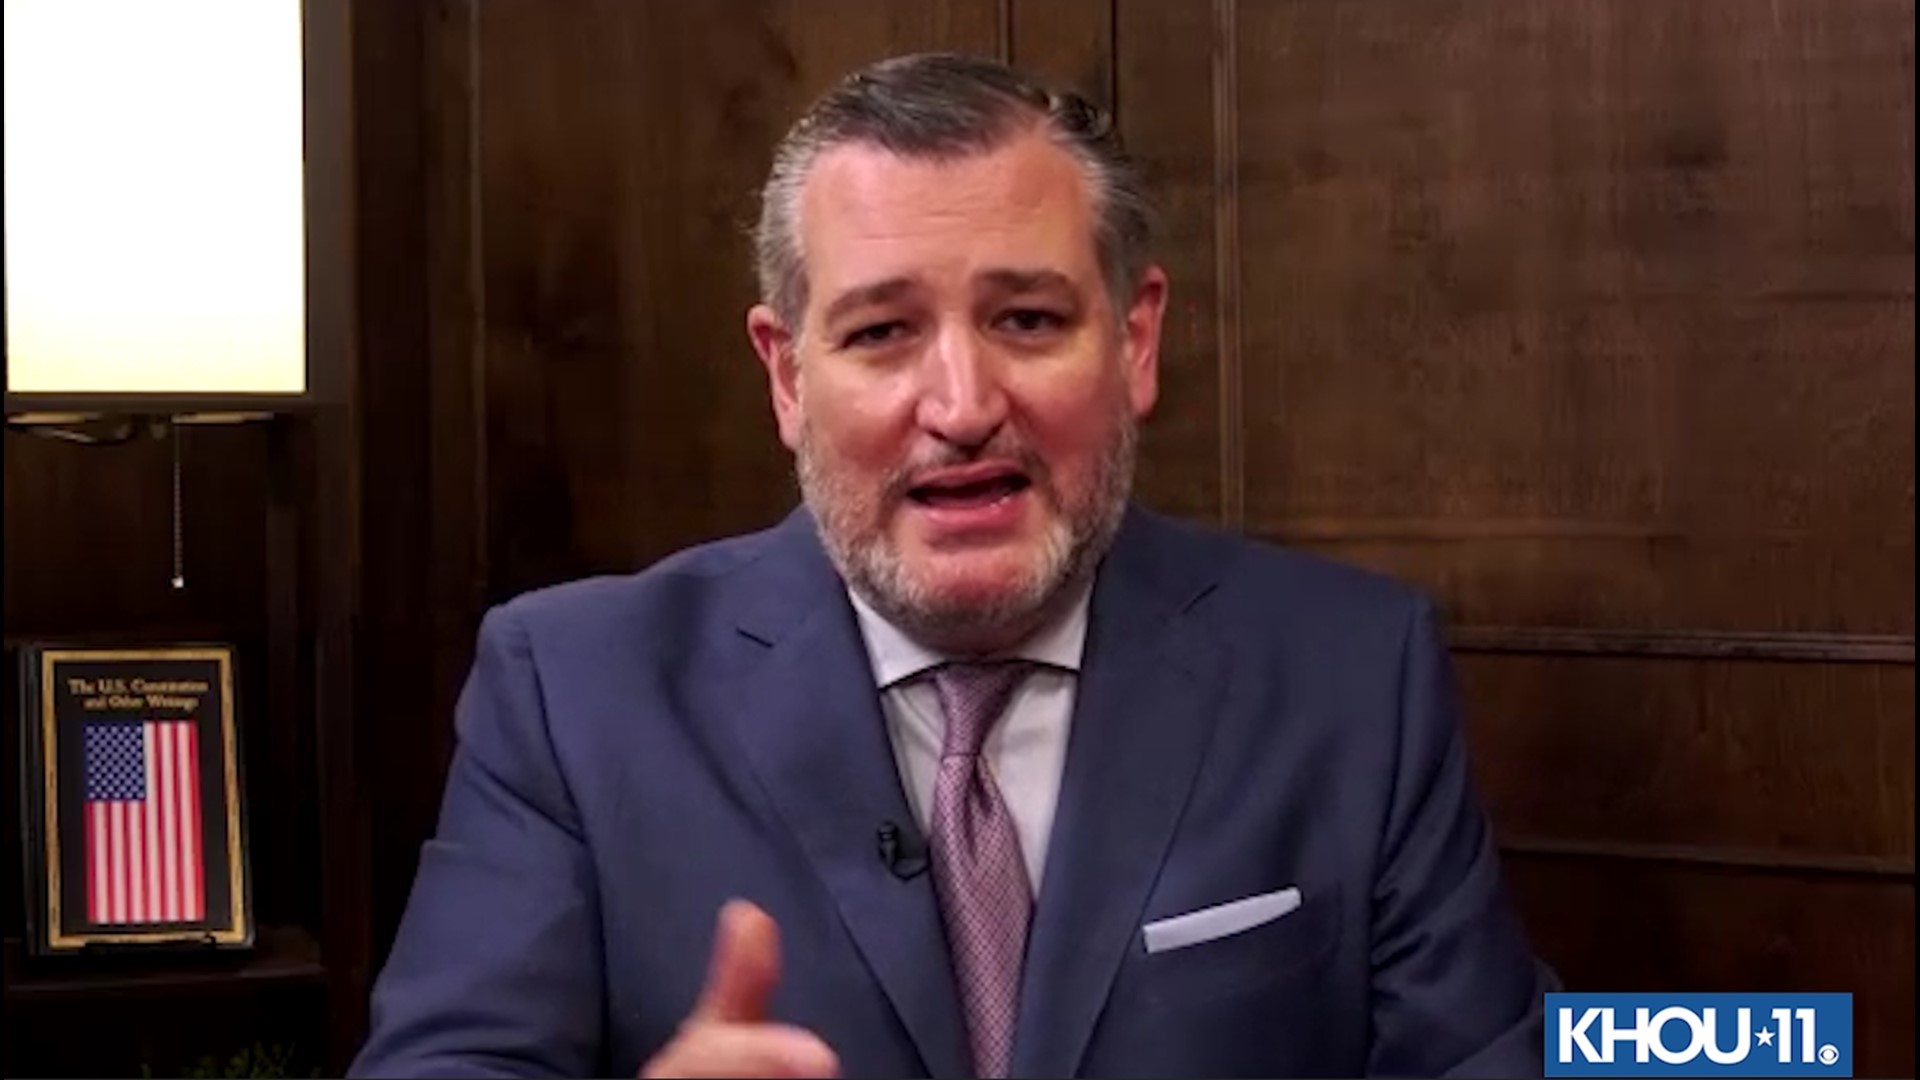 Texas Sen. Ted Cruz opens up about the war in Israel, border policy and his podcast.